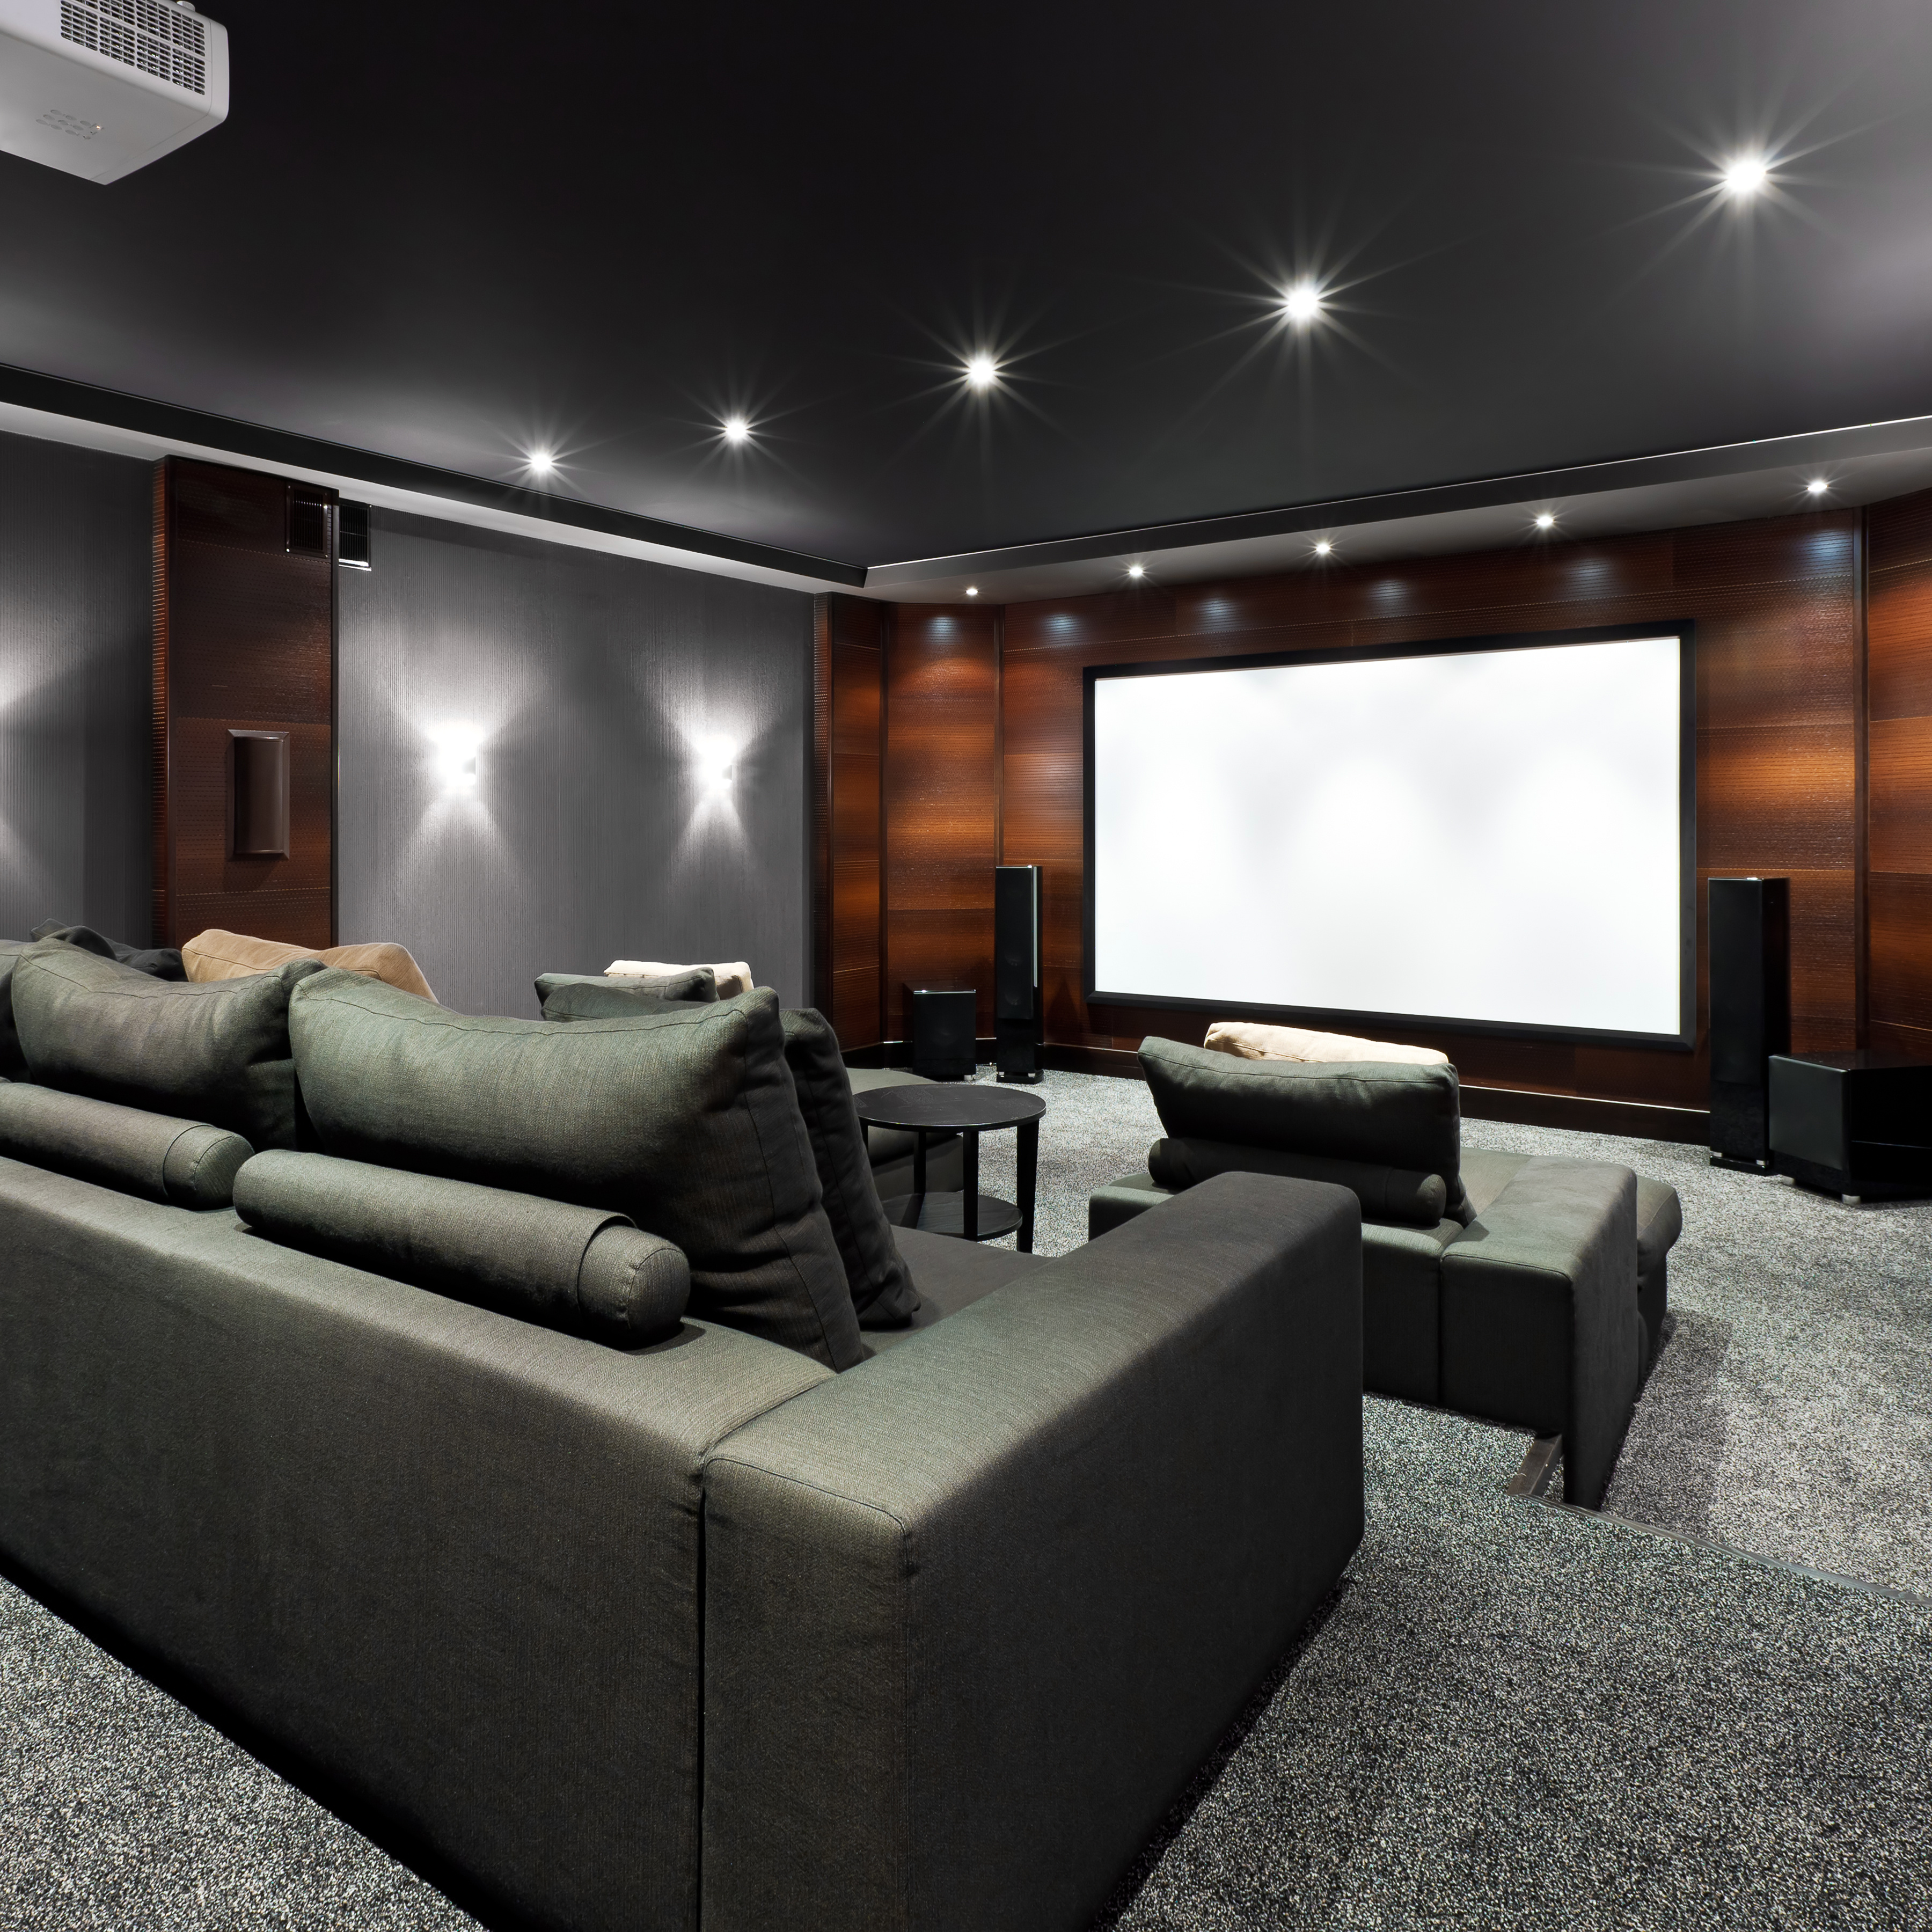 Home Theater and Media Room Design Ideas